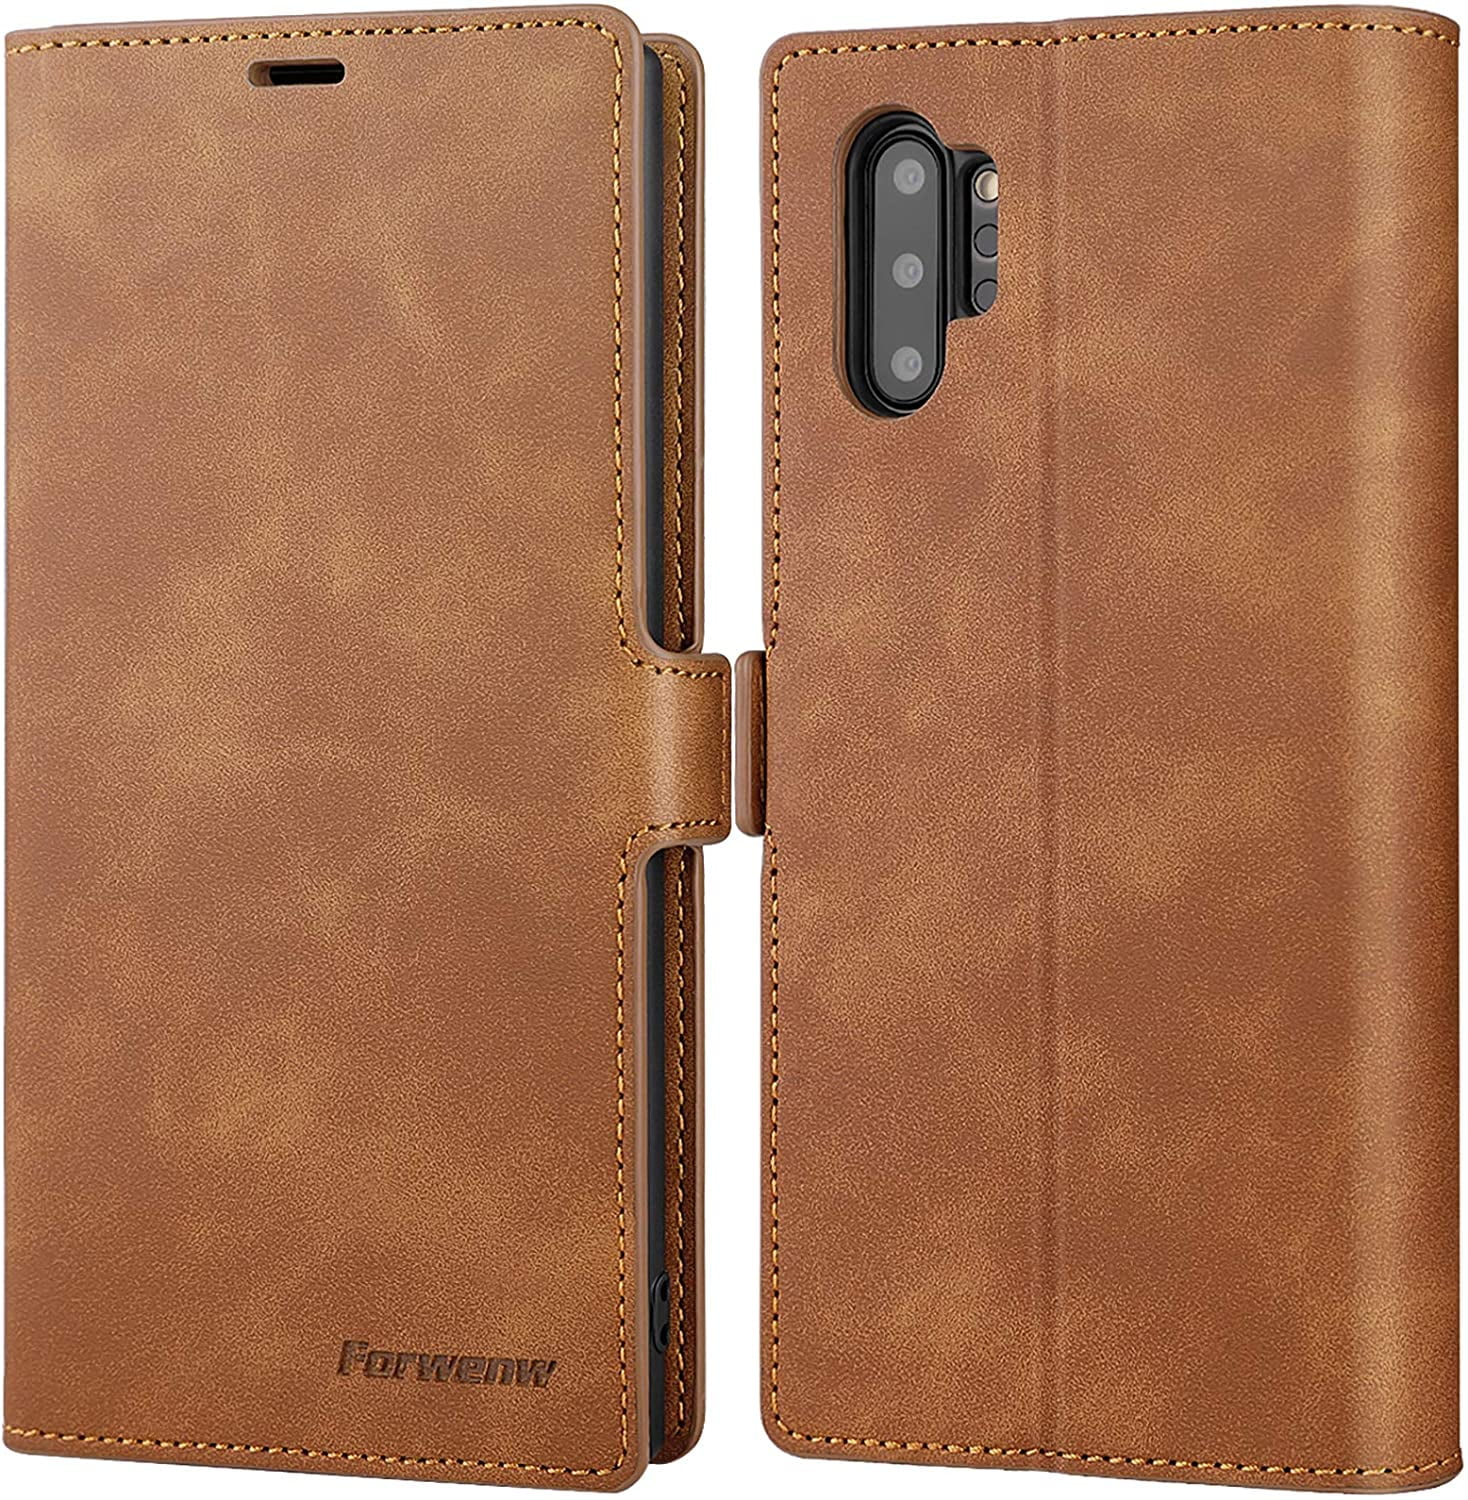 Samsung Galaxy Note10 Plus Flip Case Cover for Samsung Galaxy Note10 Plus Leather Kickstand Mobile Phone Cover Card Holders Extra-Durable Business with Free Waterproof-Bag 